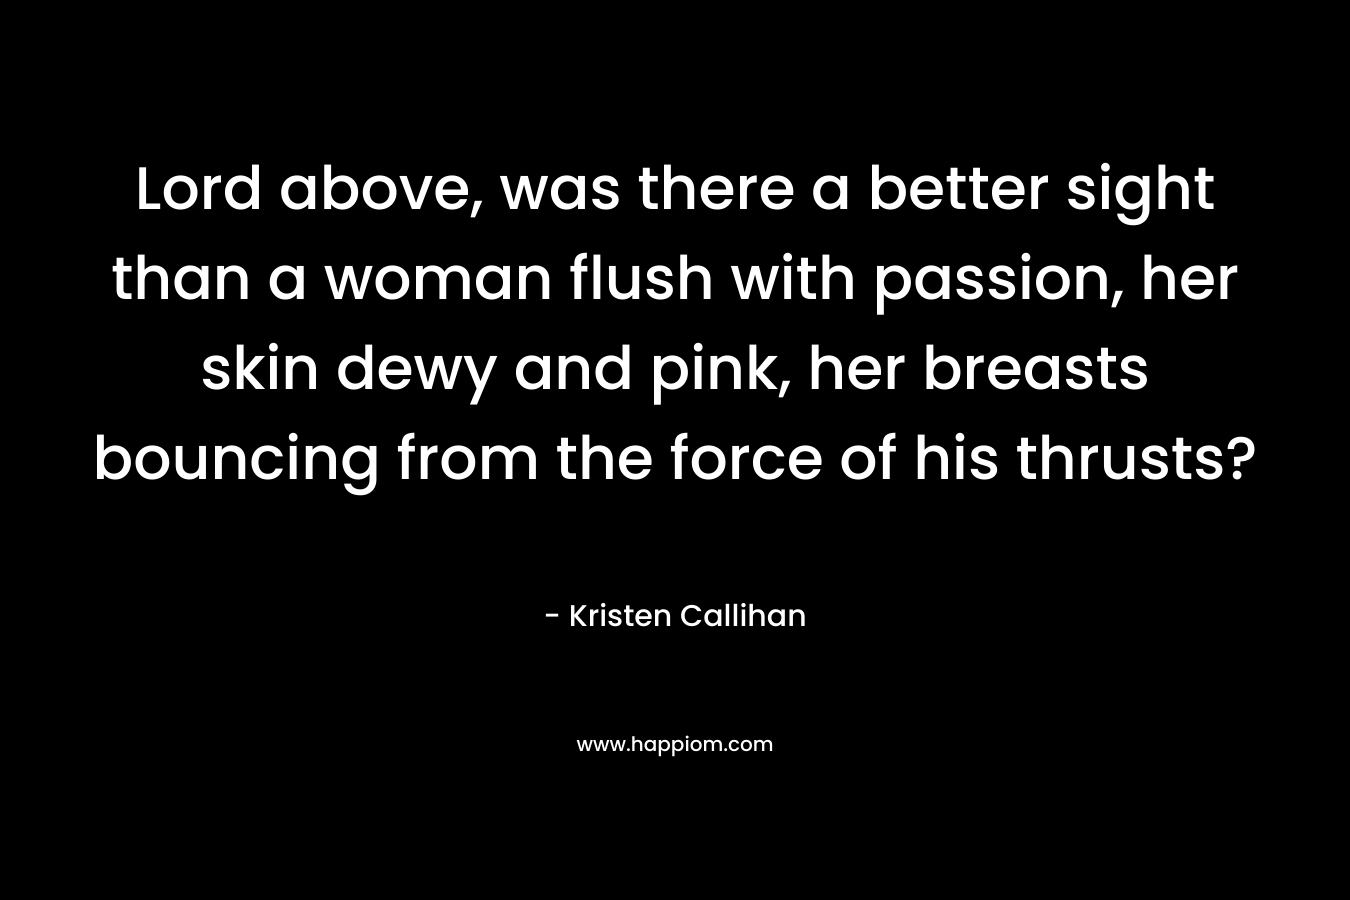 Lord above, was there a better sight than a woman flush with passion, her skin dewy and pink, her breasts bouncing from the force of his thrusts? – Kristen Callihan